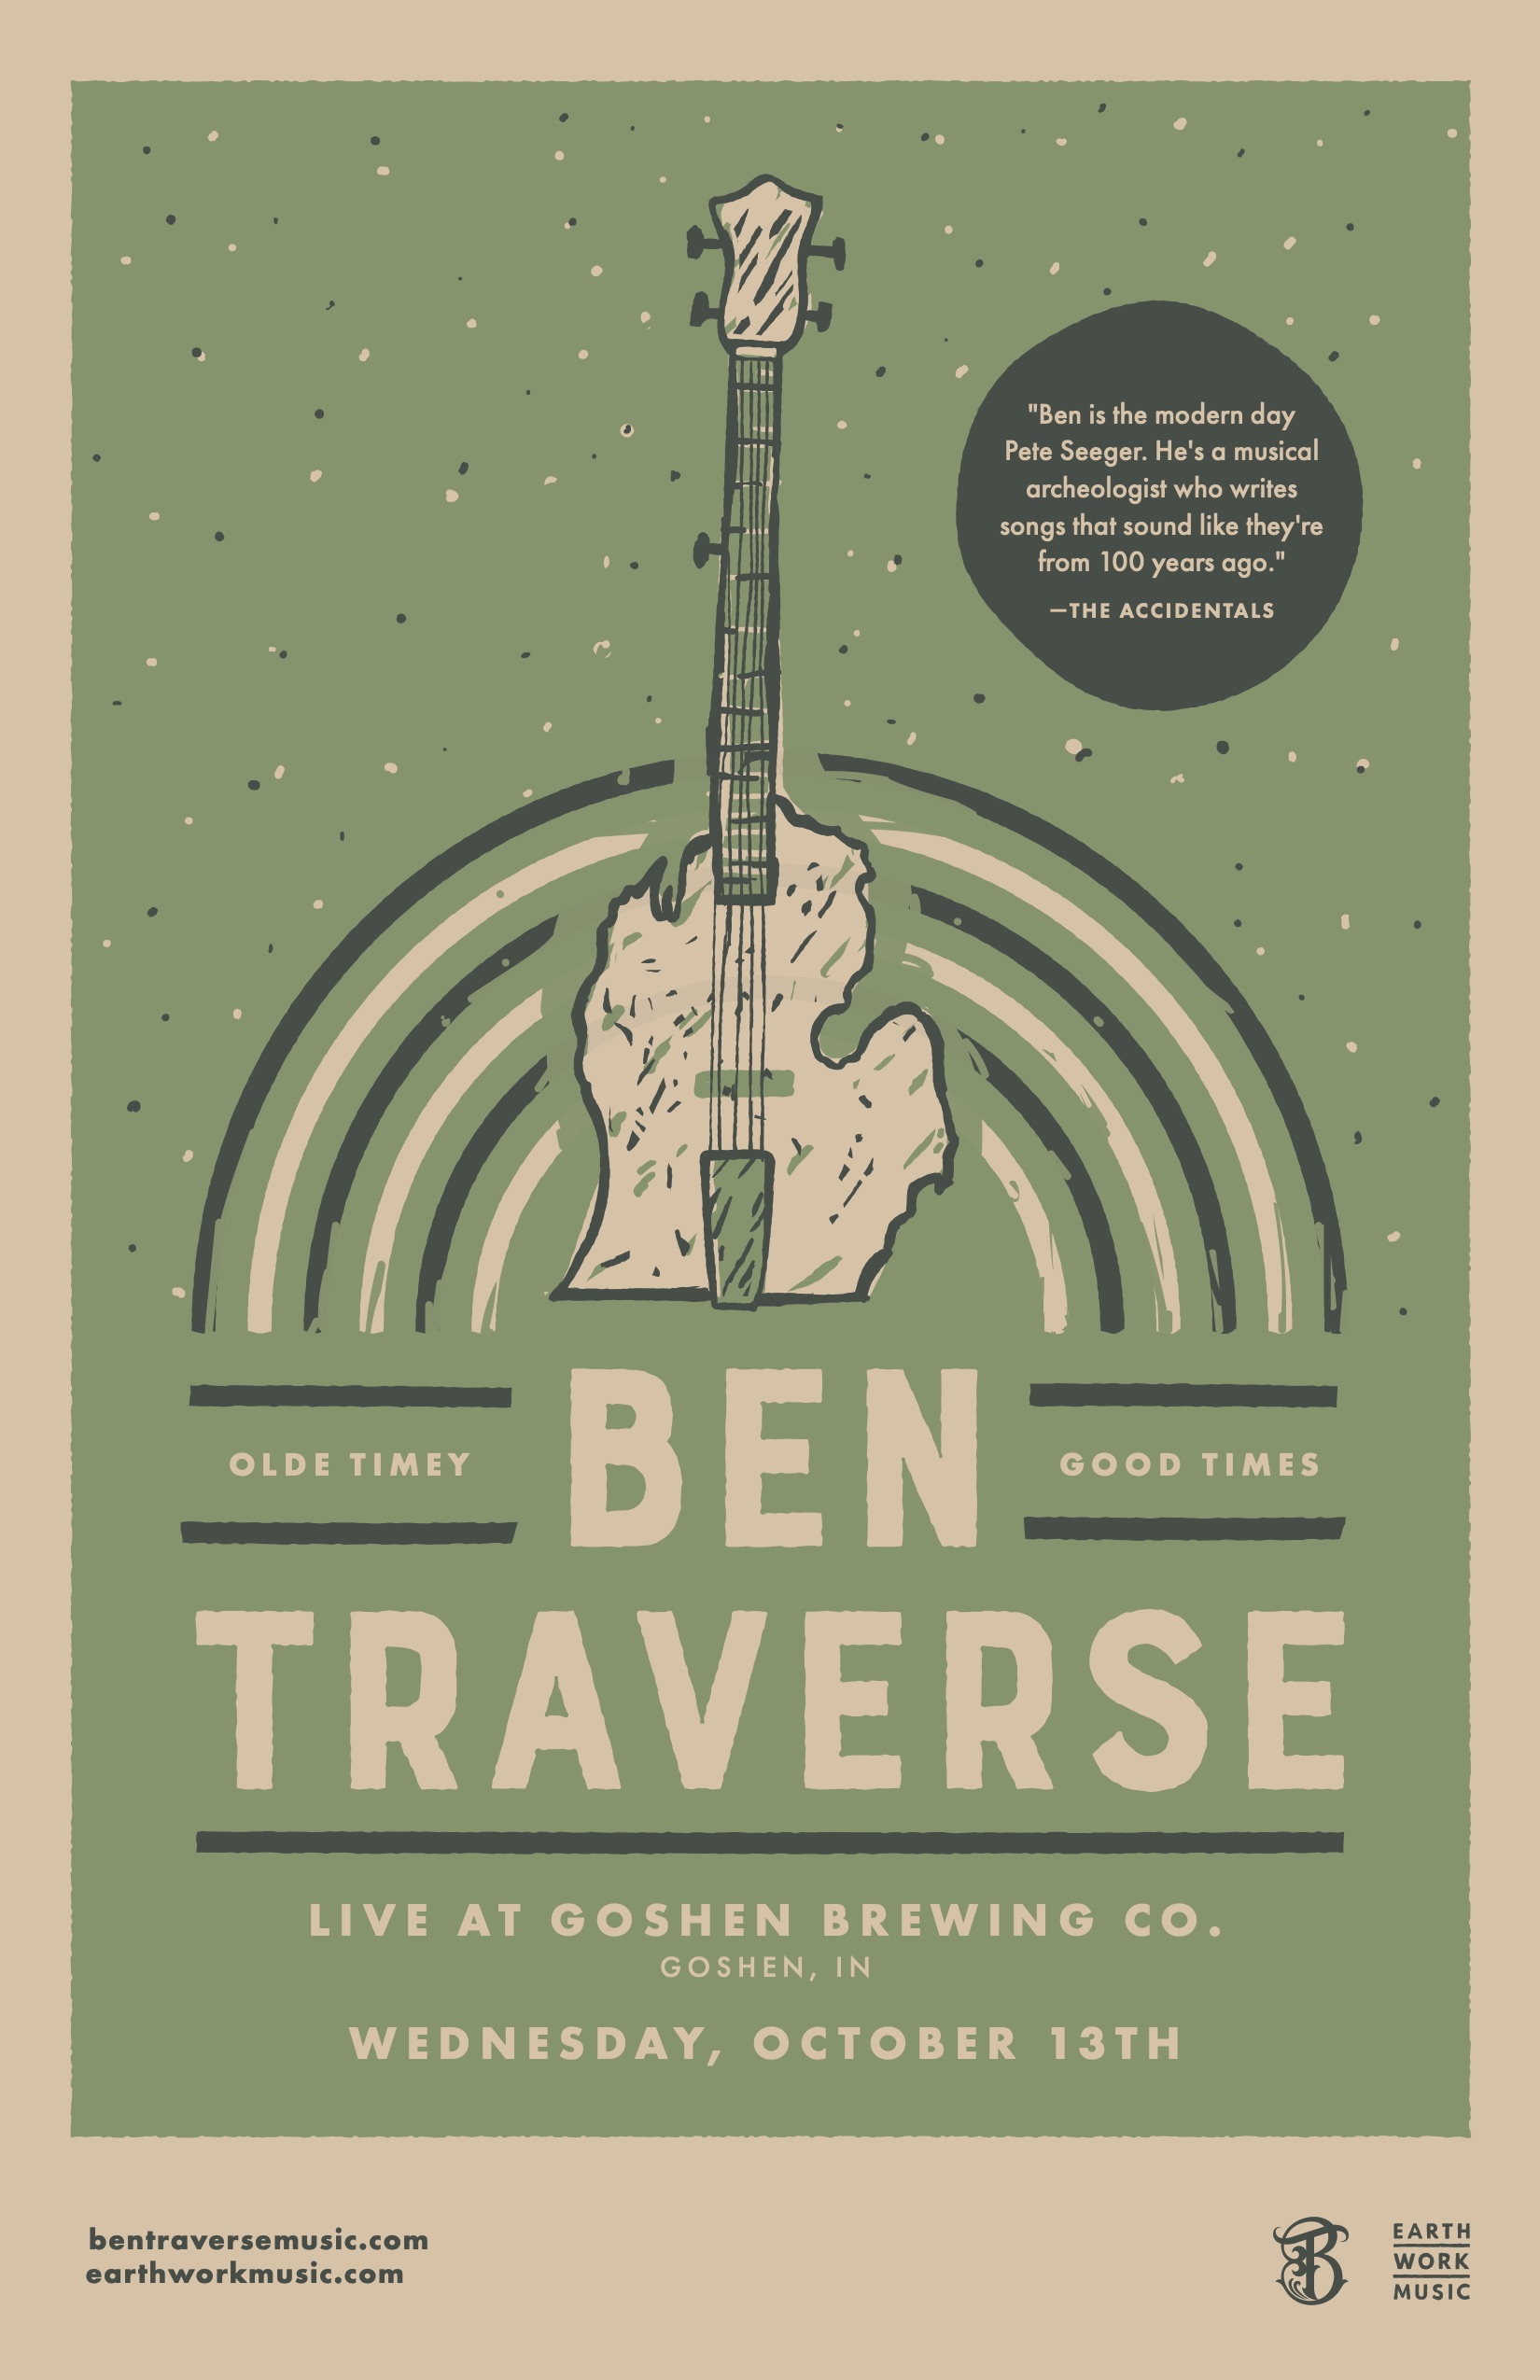 Poster featuring Michigan's lower peninsula being used as the body of a banjo. The show is Ben Traverse playing at Goshen Brewing Co. on Wednesday, October 13th, 2021.